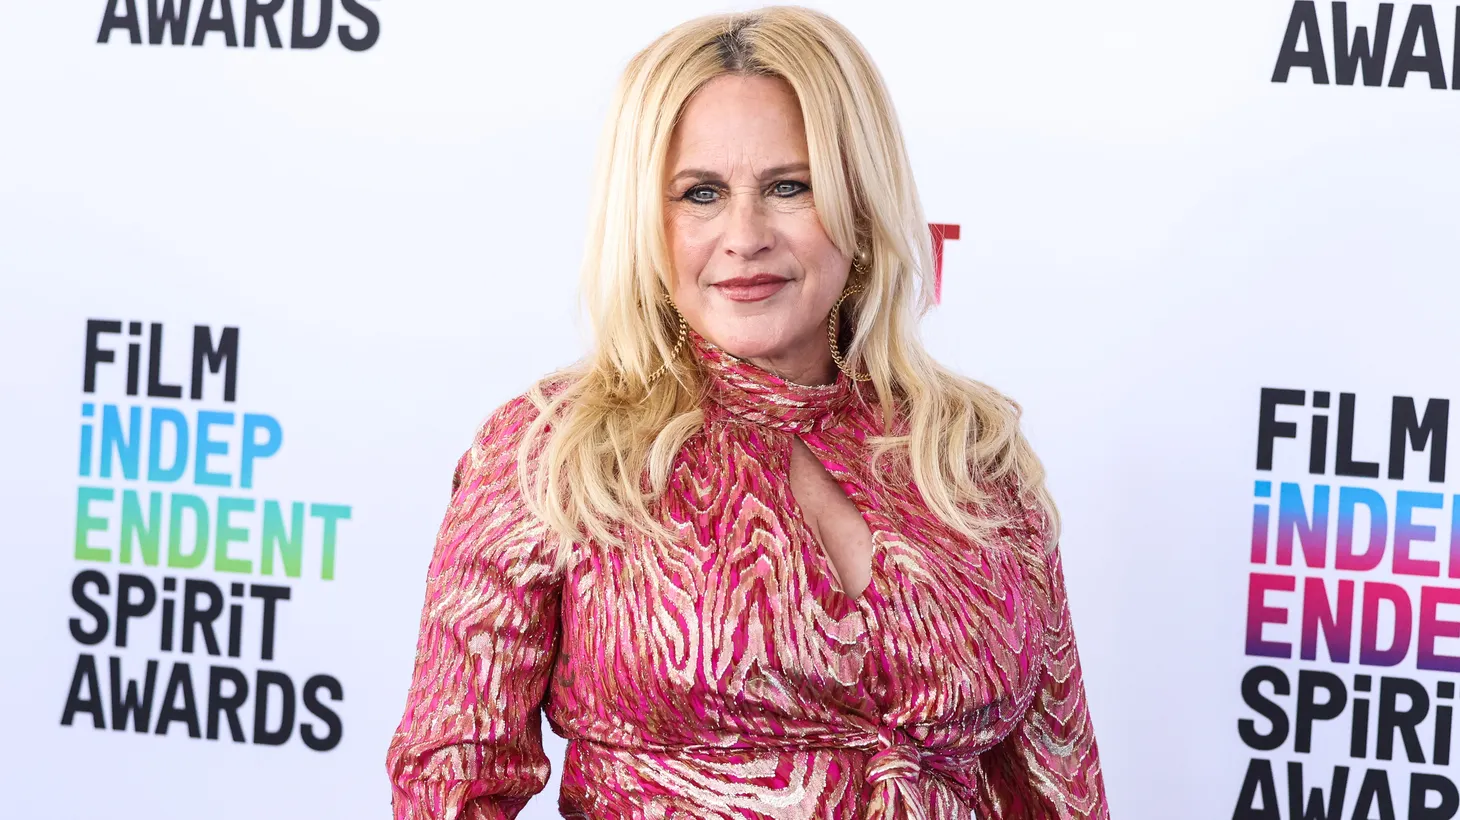 Patricia Arquette arrives at the 2023 Film Independent Spirit Awards held on March 4, 2023 at Santa Monica Beach in California, United States.